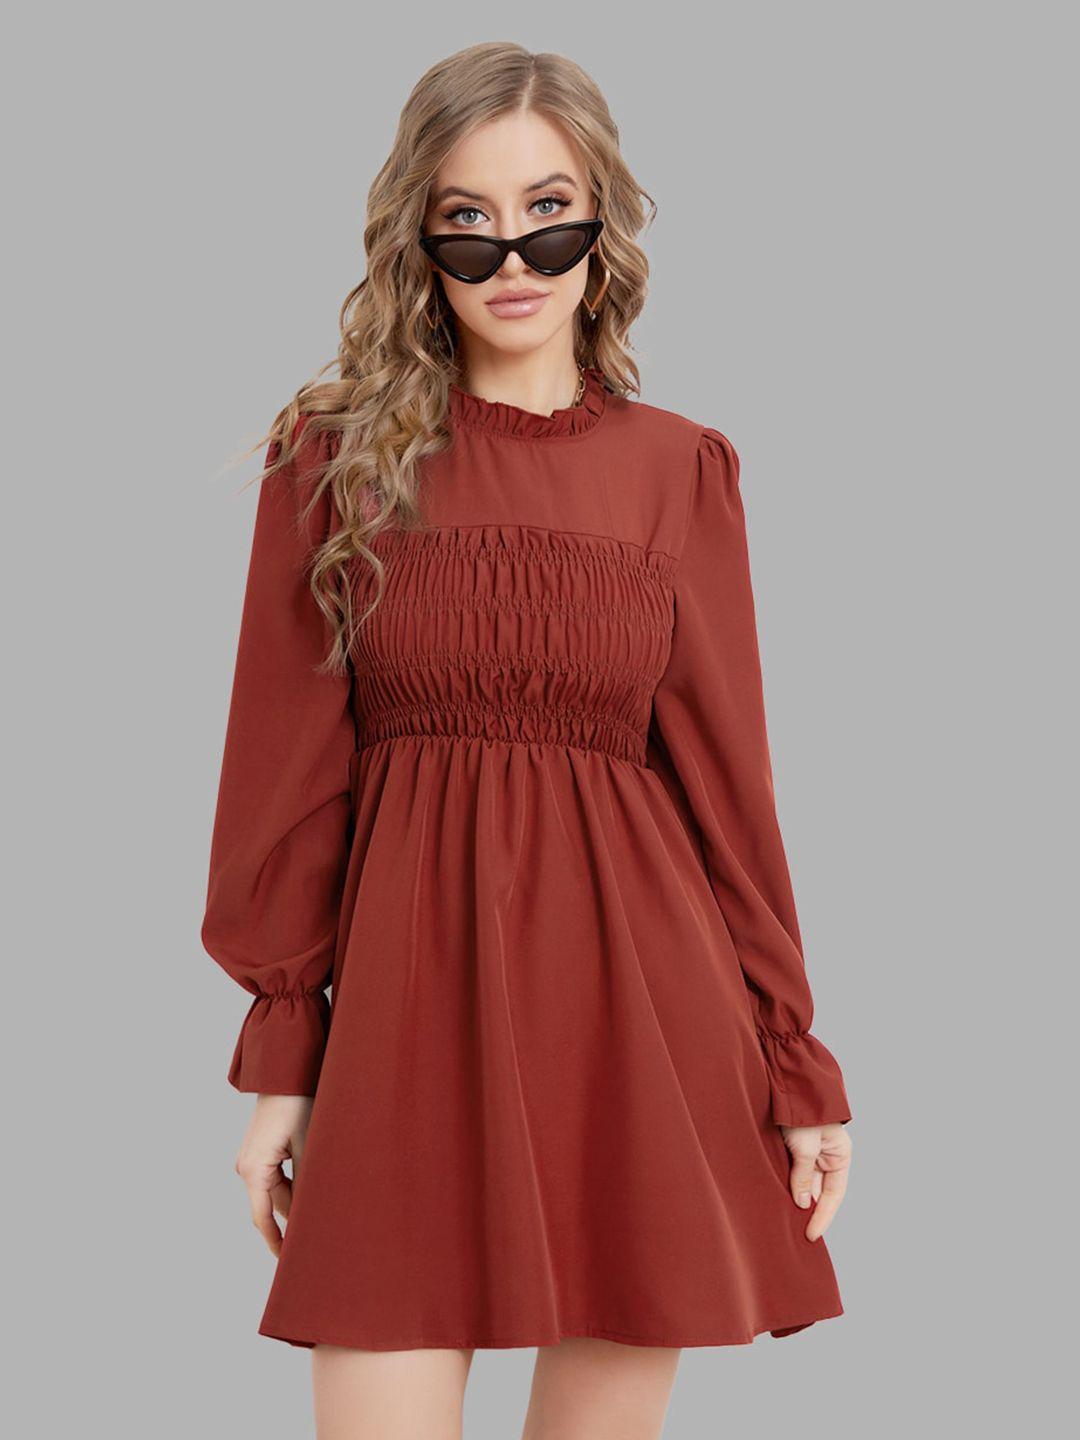 jc collection maroon solid mini dress